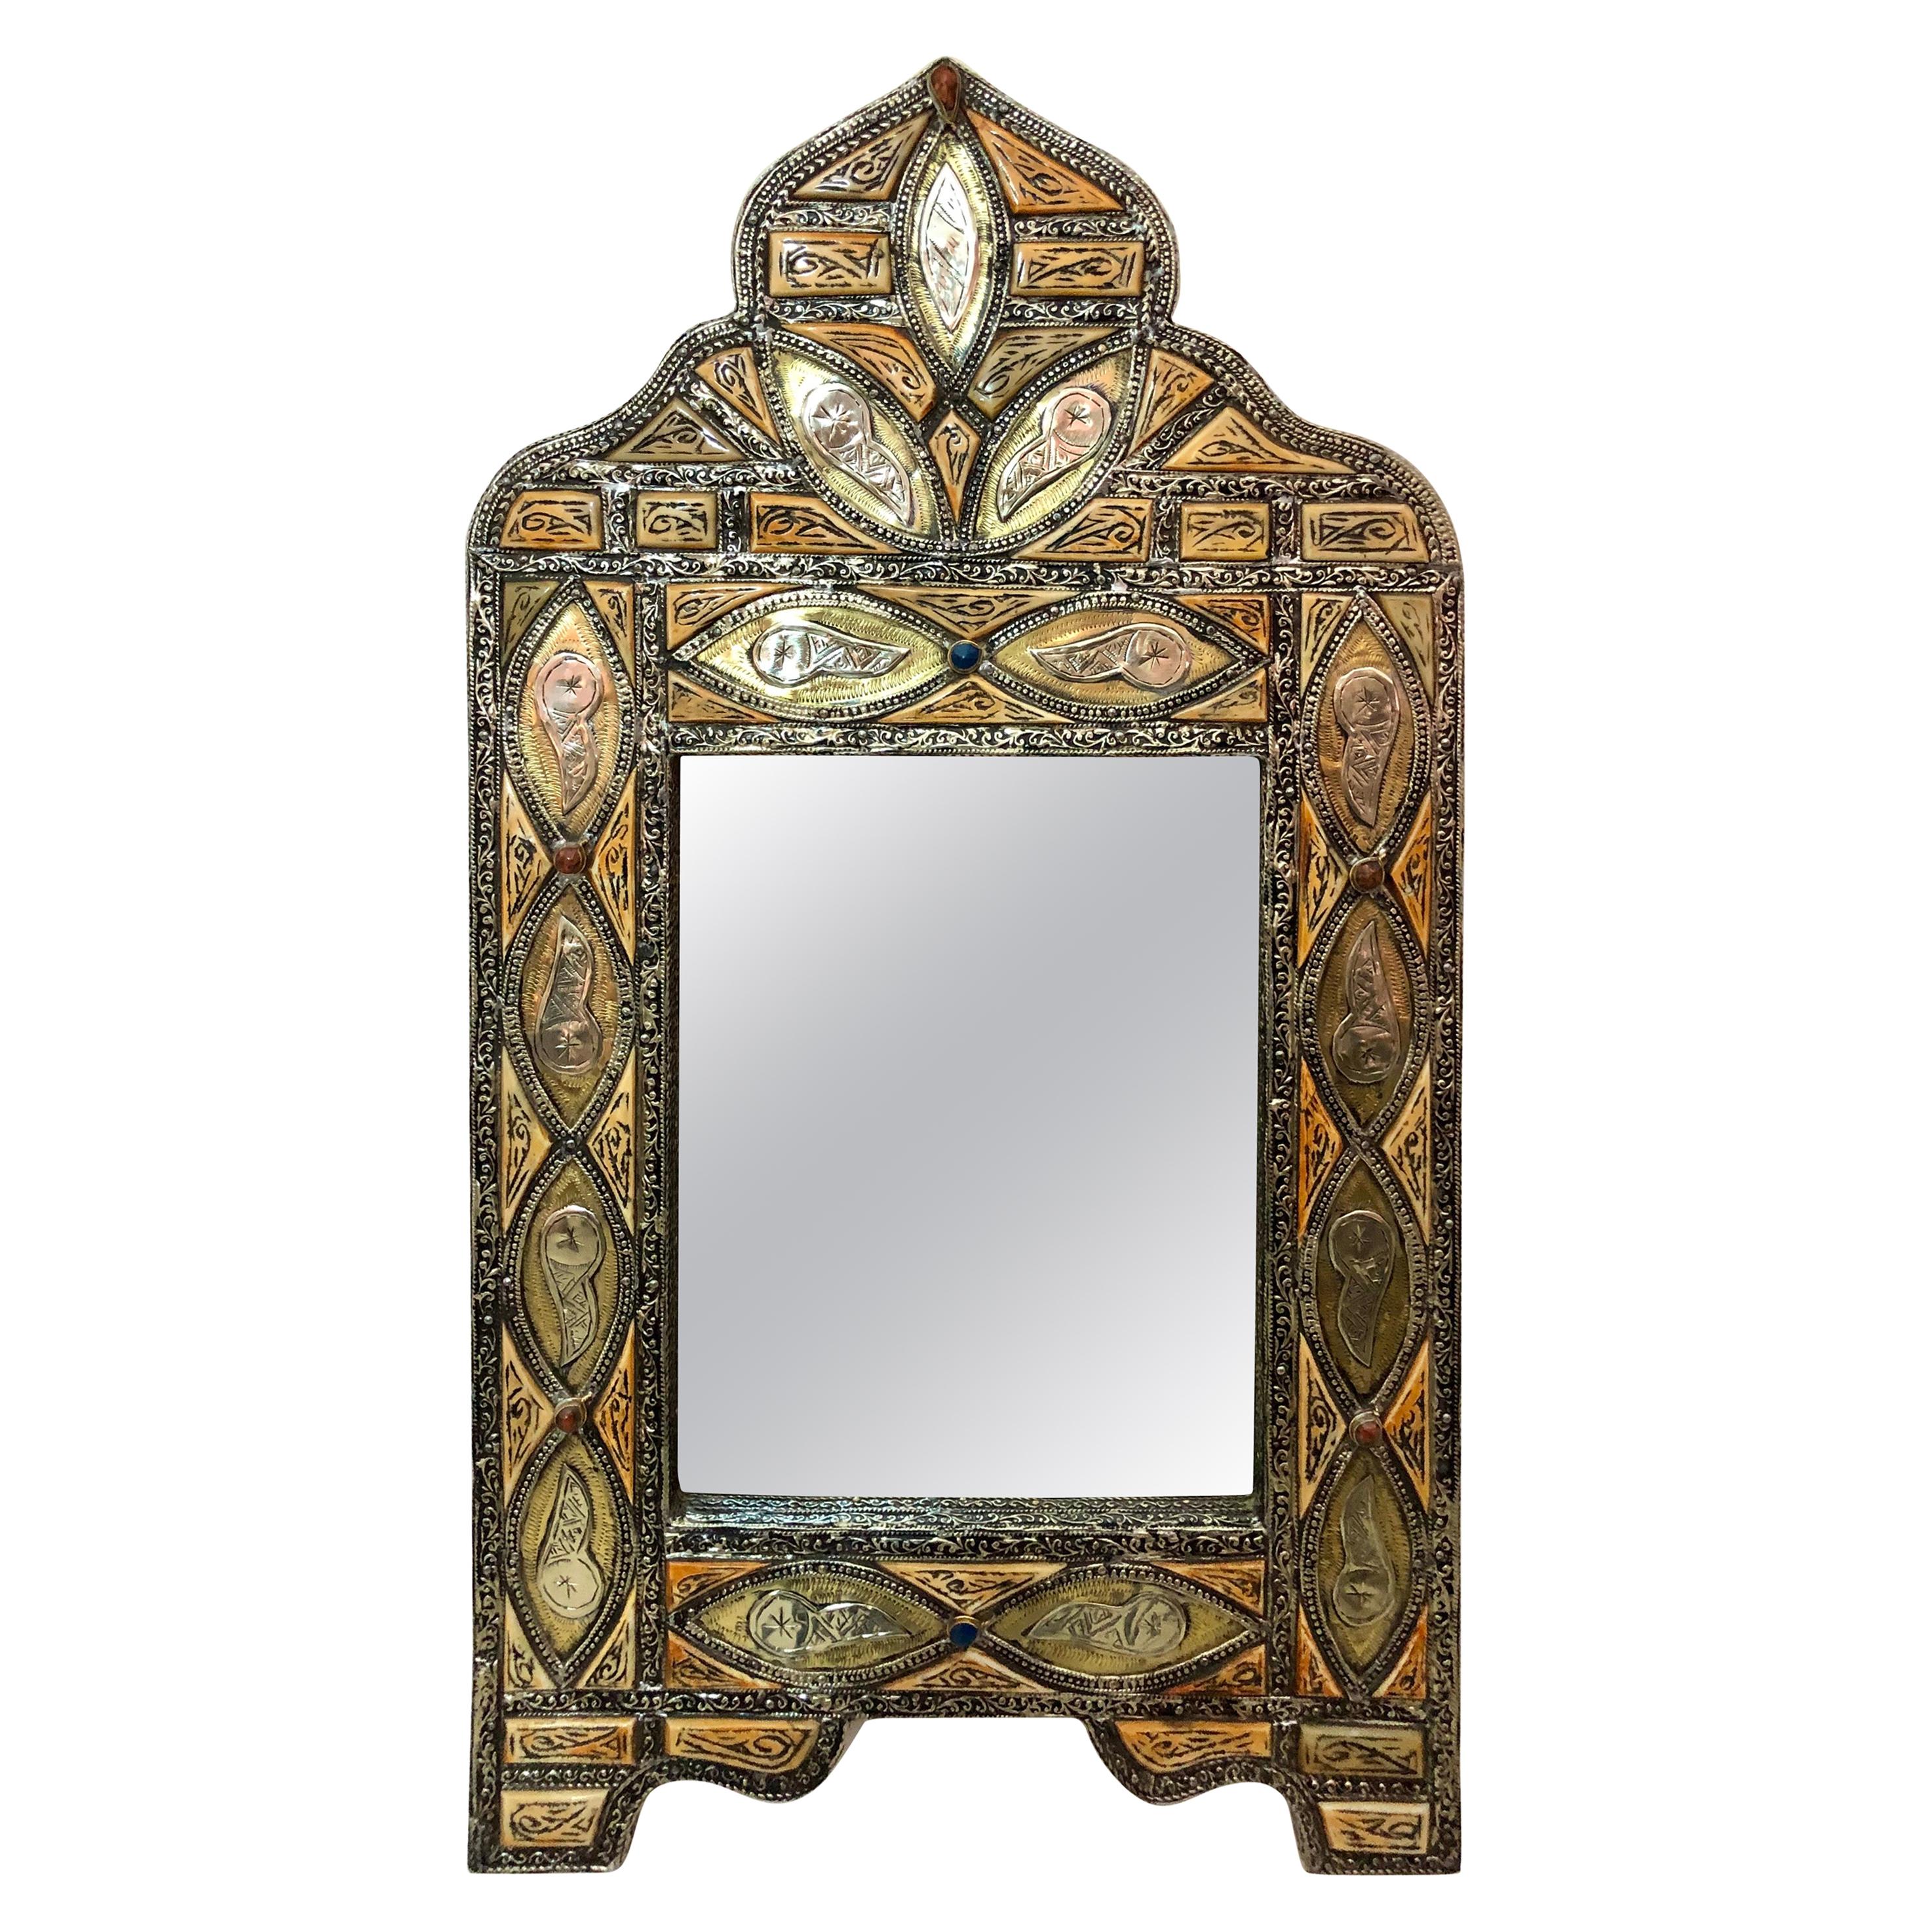 Mirror wall Decor Rectangle Carved MetalCopper Handmade Vintage Moroccan10''16'' 